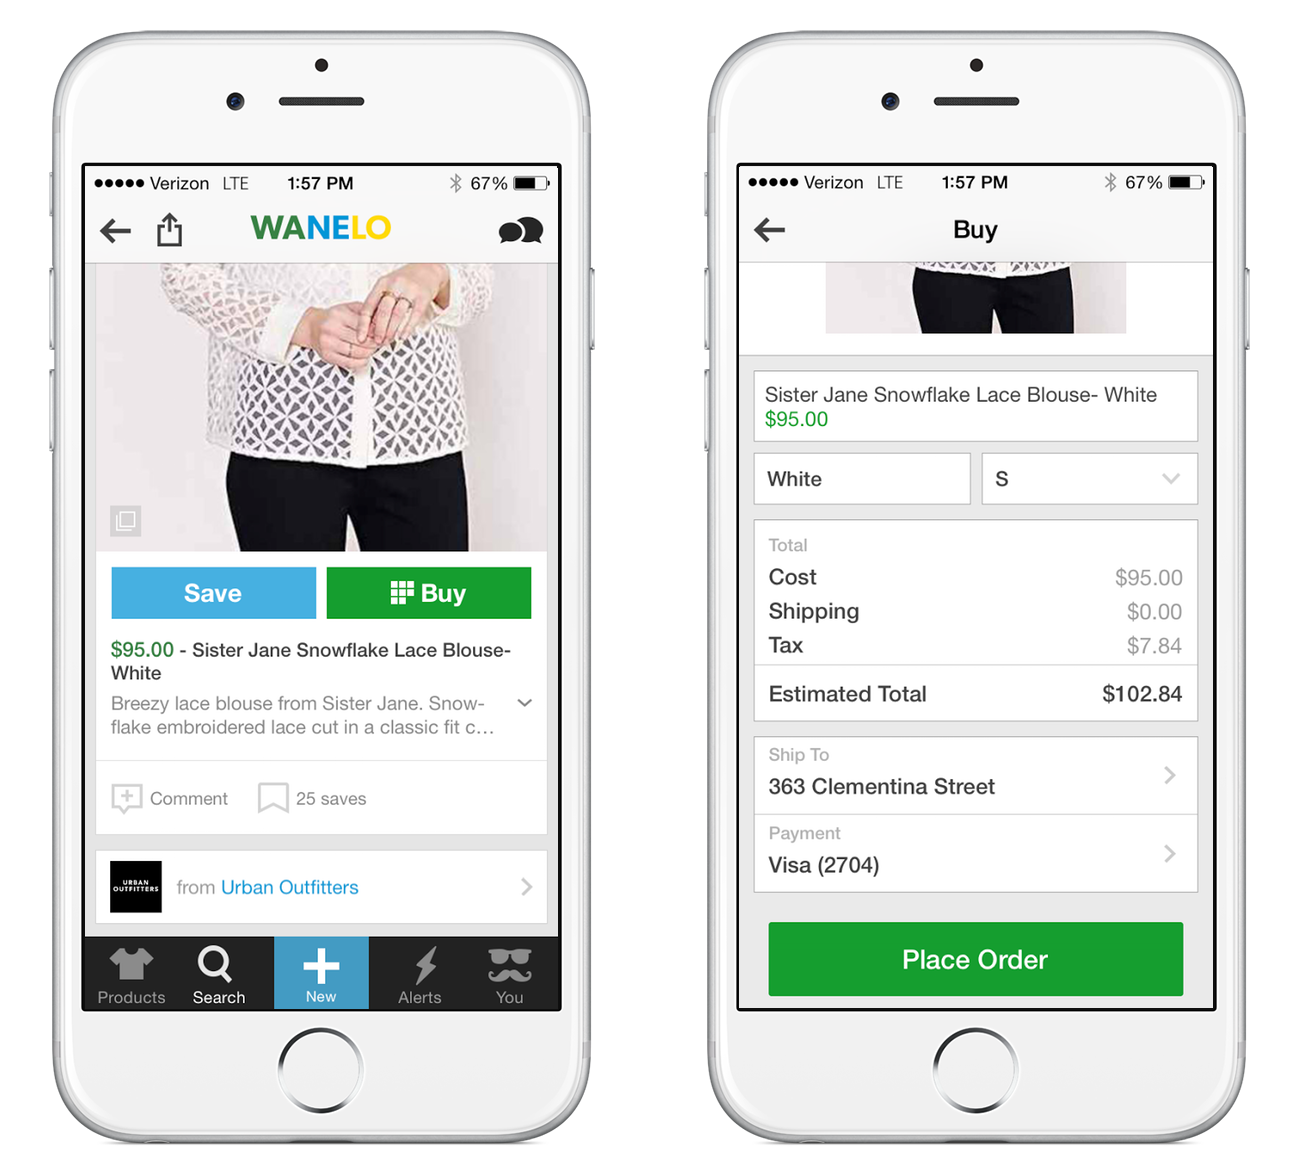 "Buy on Wanelo" allows users to purchase items directly from the app, without being redirected to retailers’ ecommerce sites.